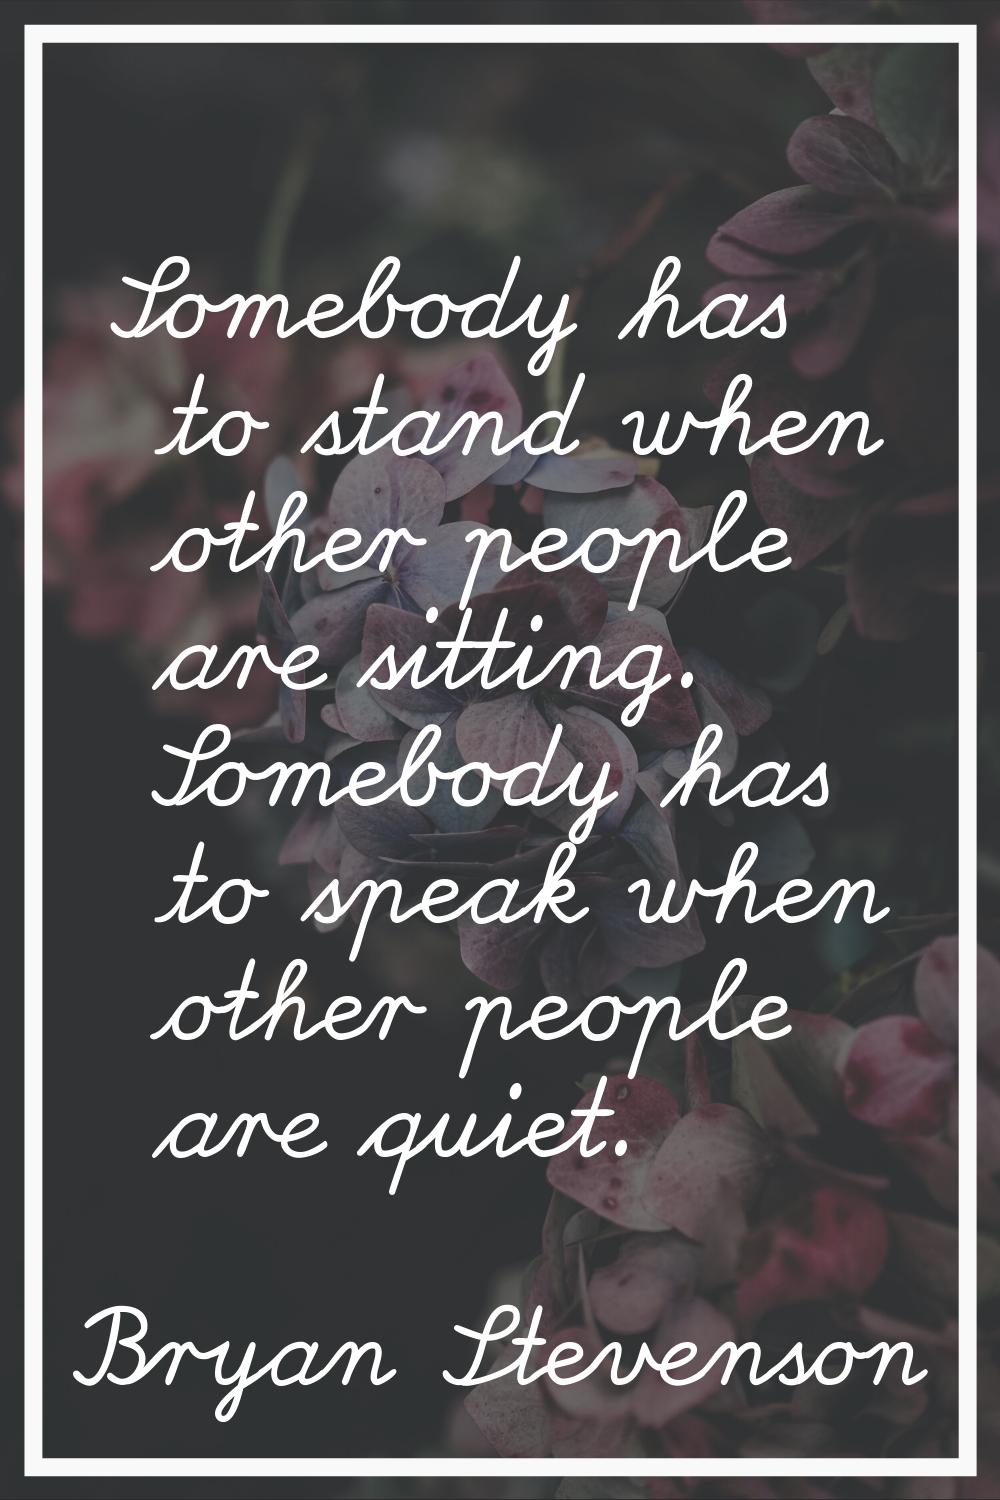 Somebody has to stand when other people are sitting. Somebody has to speak when other people are qu